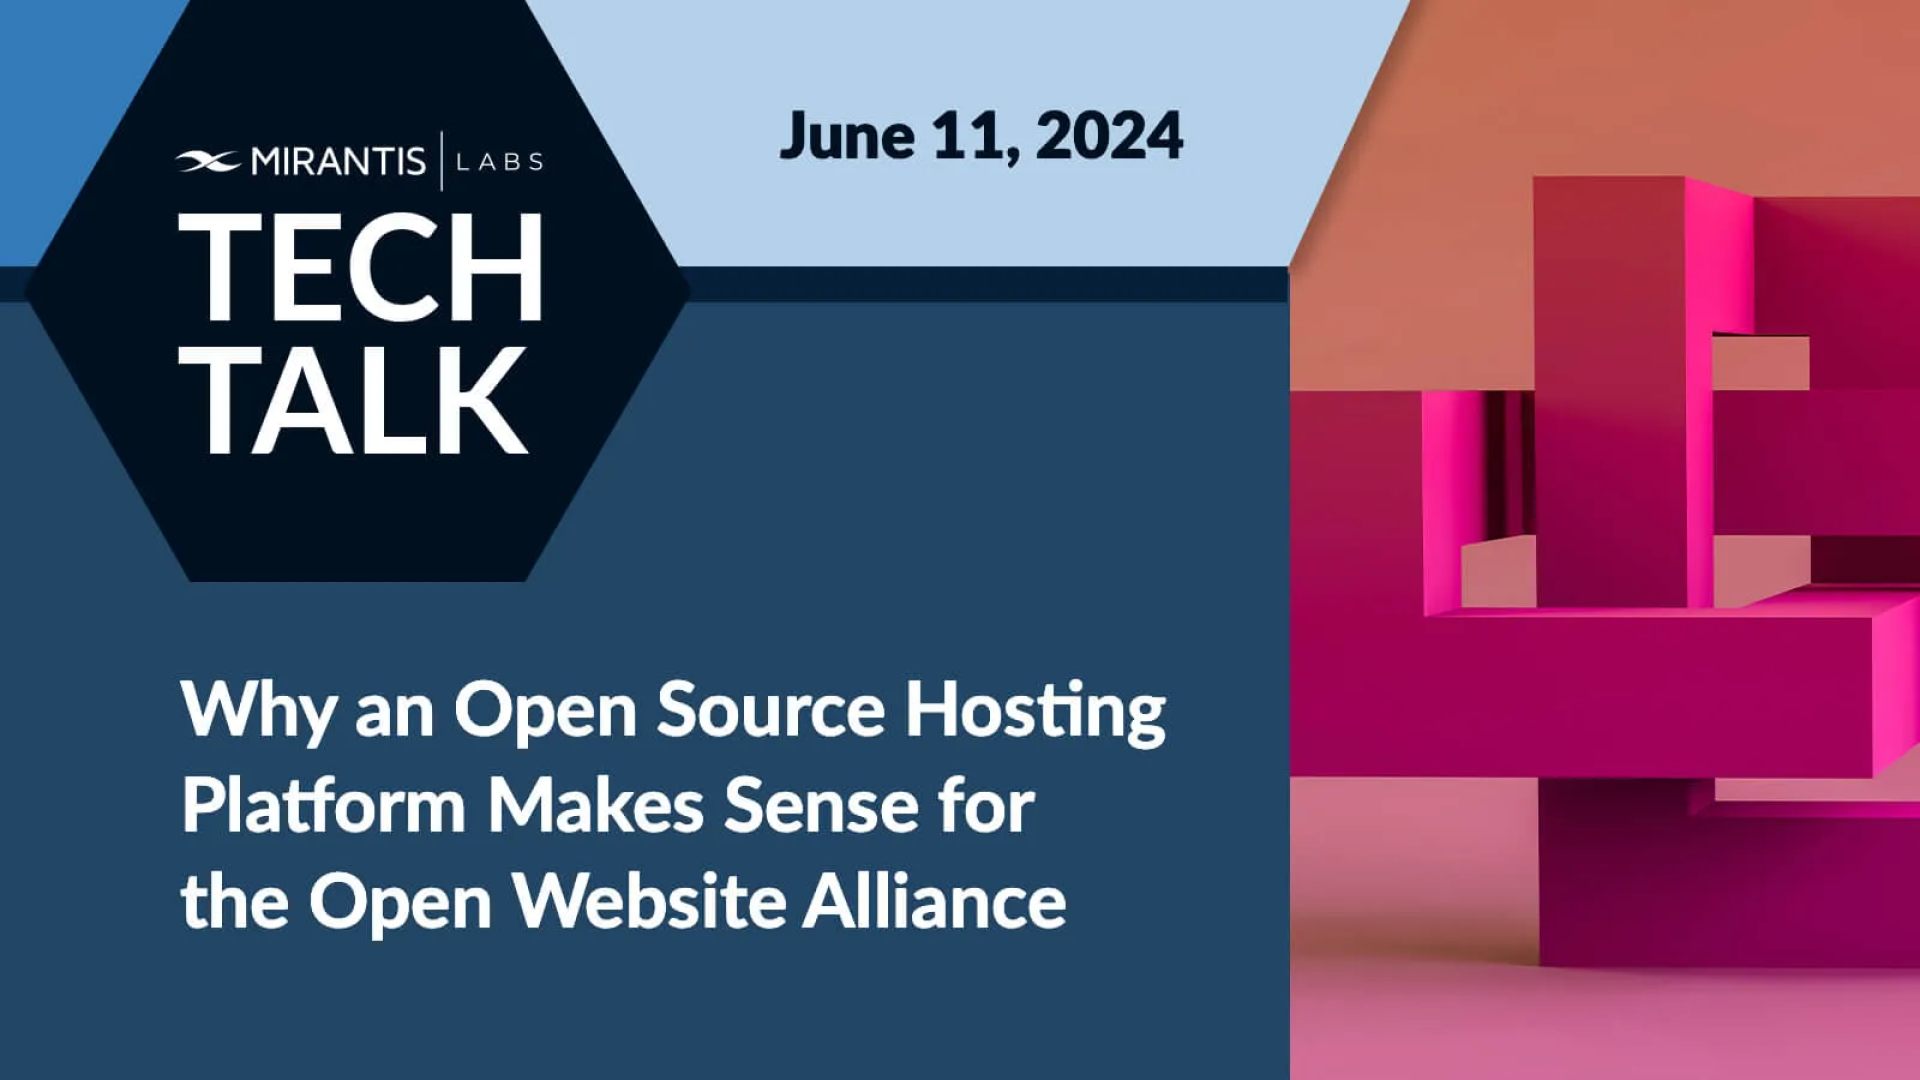 Why an Open Source Hosting Platform Makes Sense for the Open Website Alliance